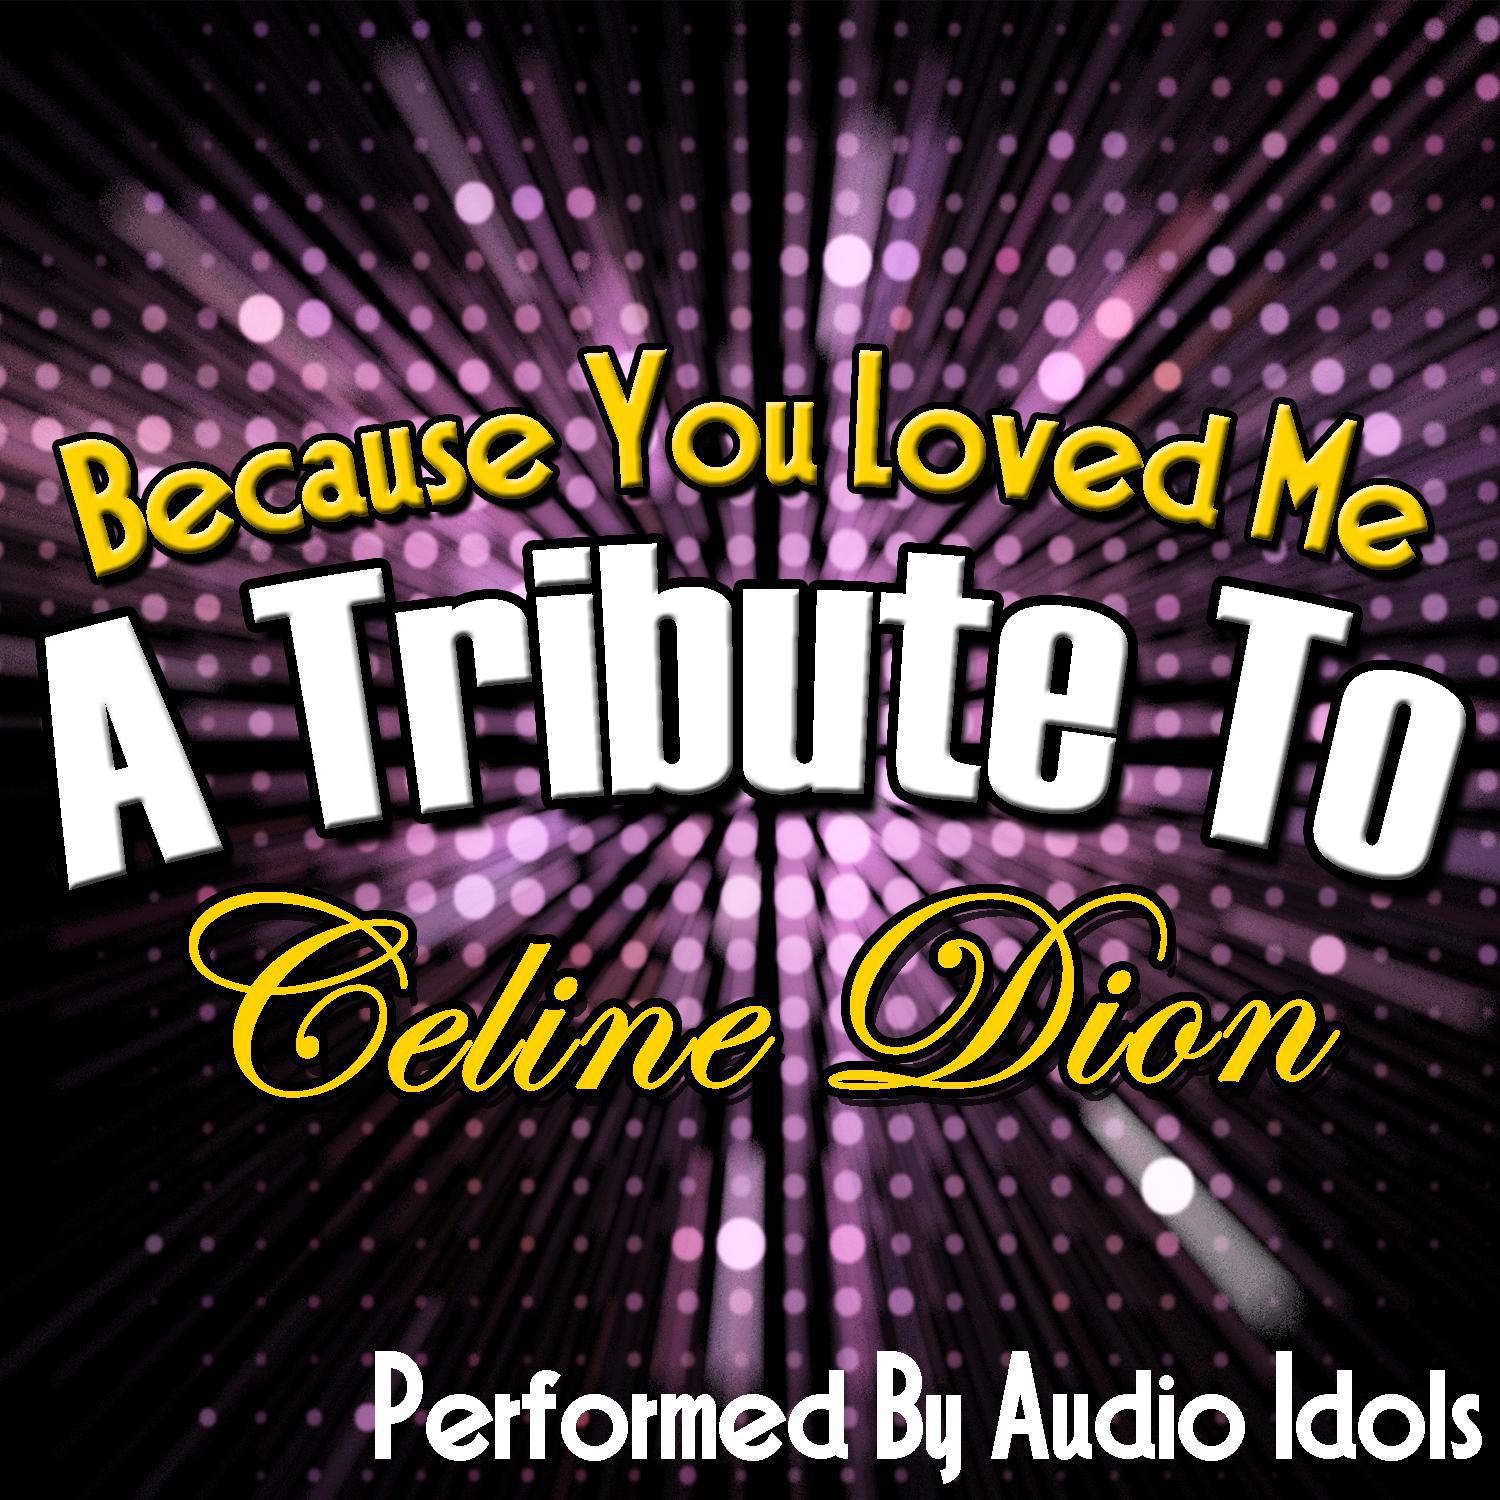 Because You Loved Me: A Tribute to Celine Dion